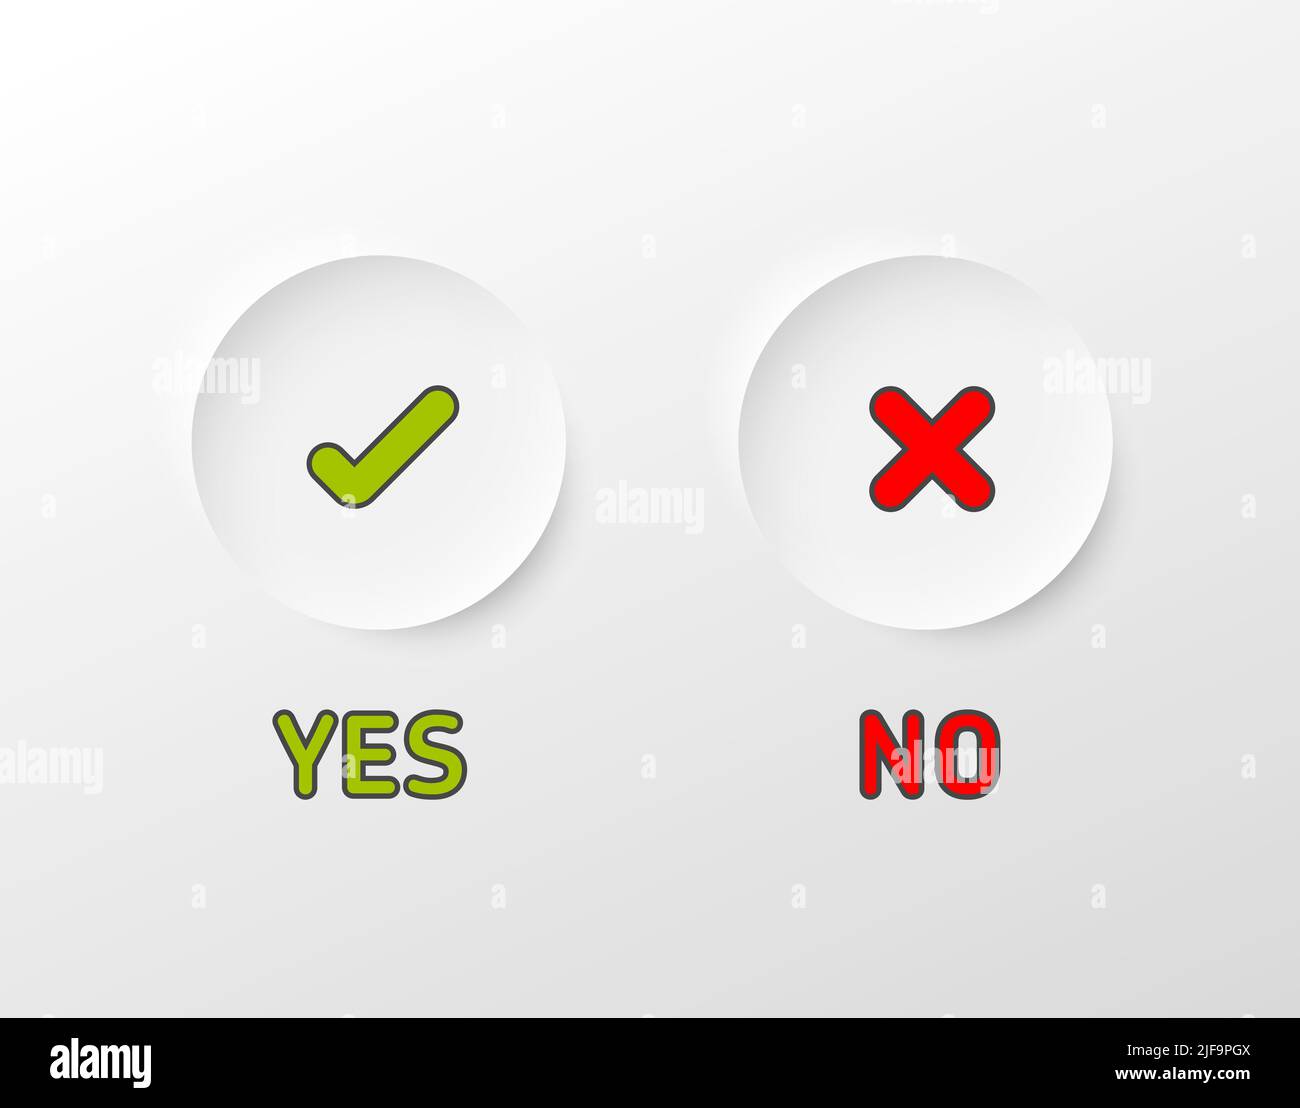 Set of fresh minimalist icons for various status - yes, no, accept, cancel in light relief circles on light gray gradient background - green and red c Stock Vector